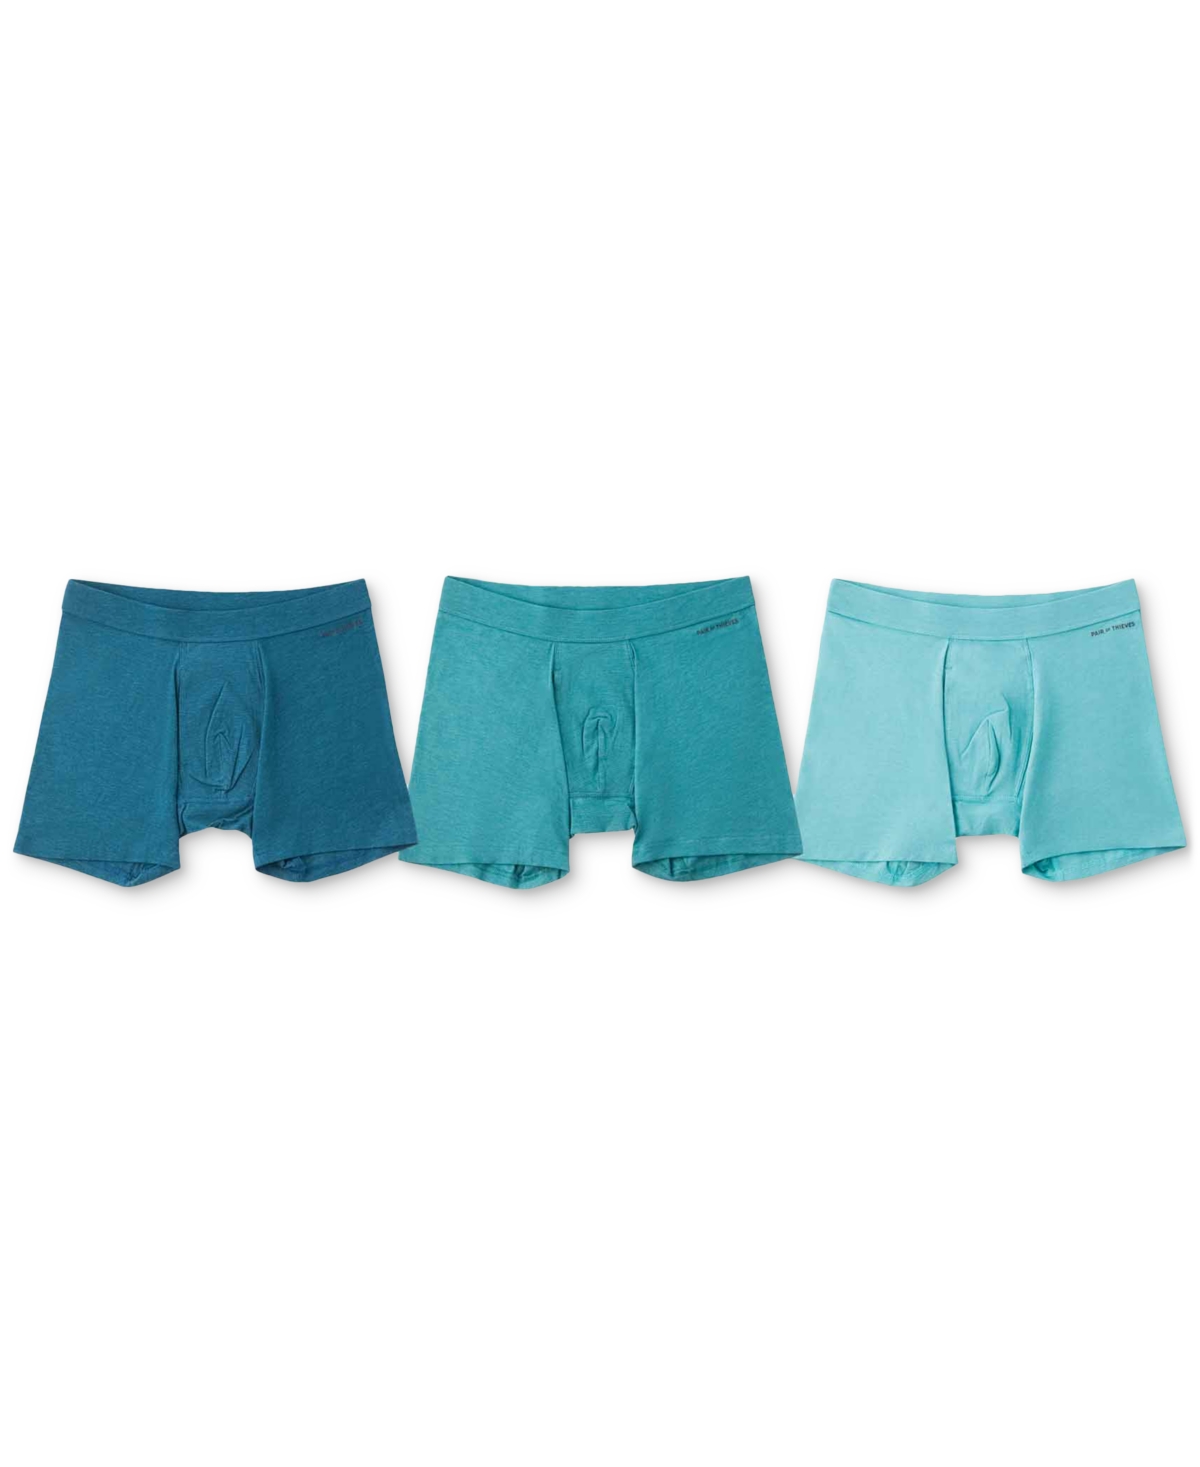 Pair Of Thieves Men's Quick Dry 3-pk. Action Blend Cotton 5" Boxer Briefs In Green